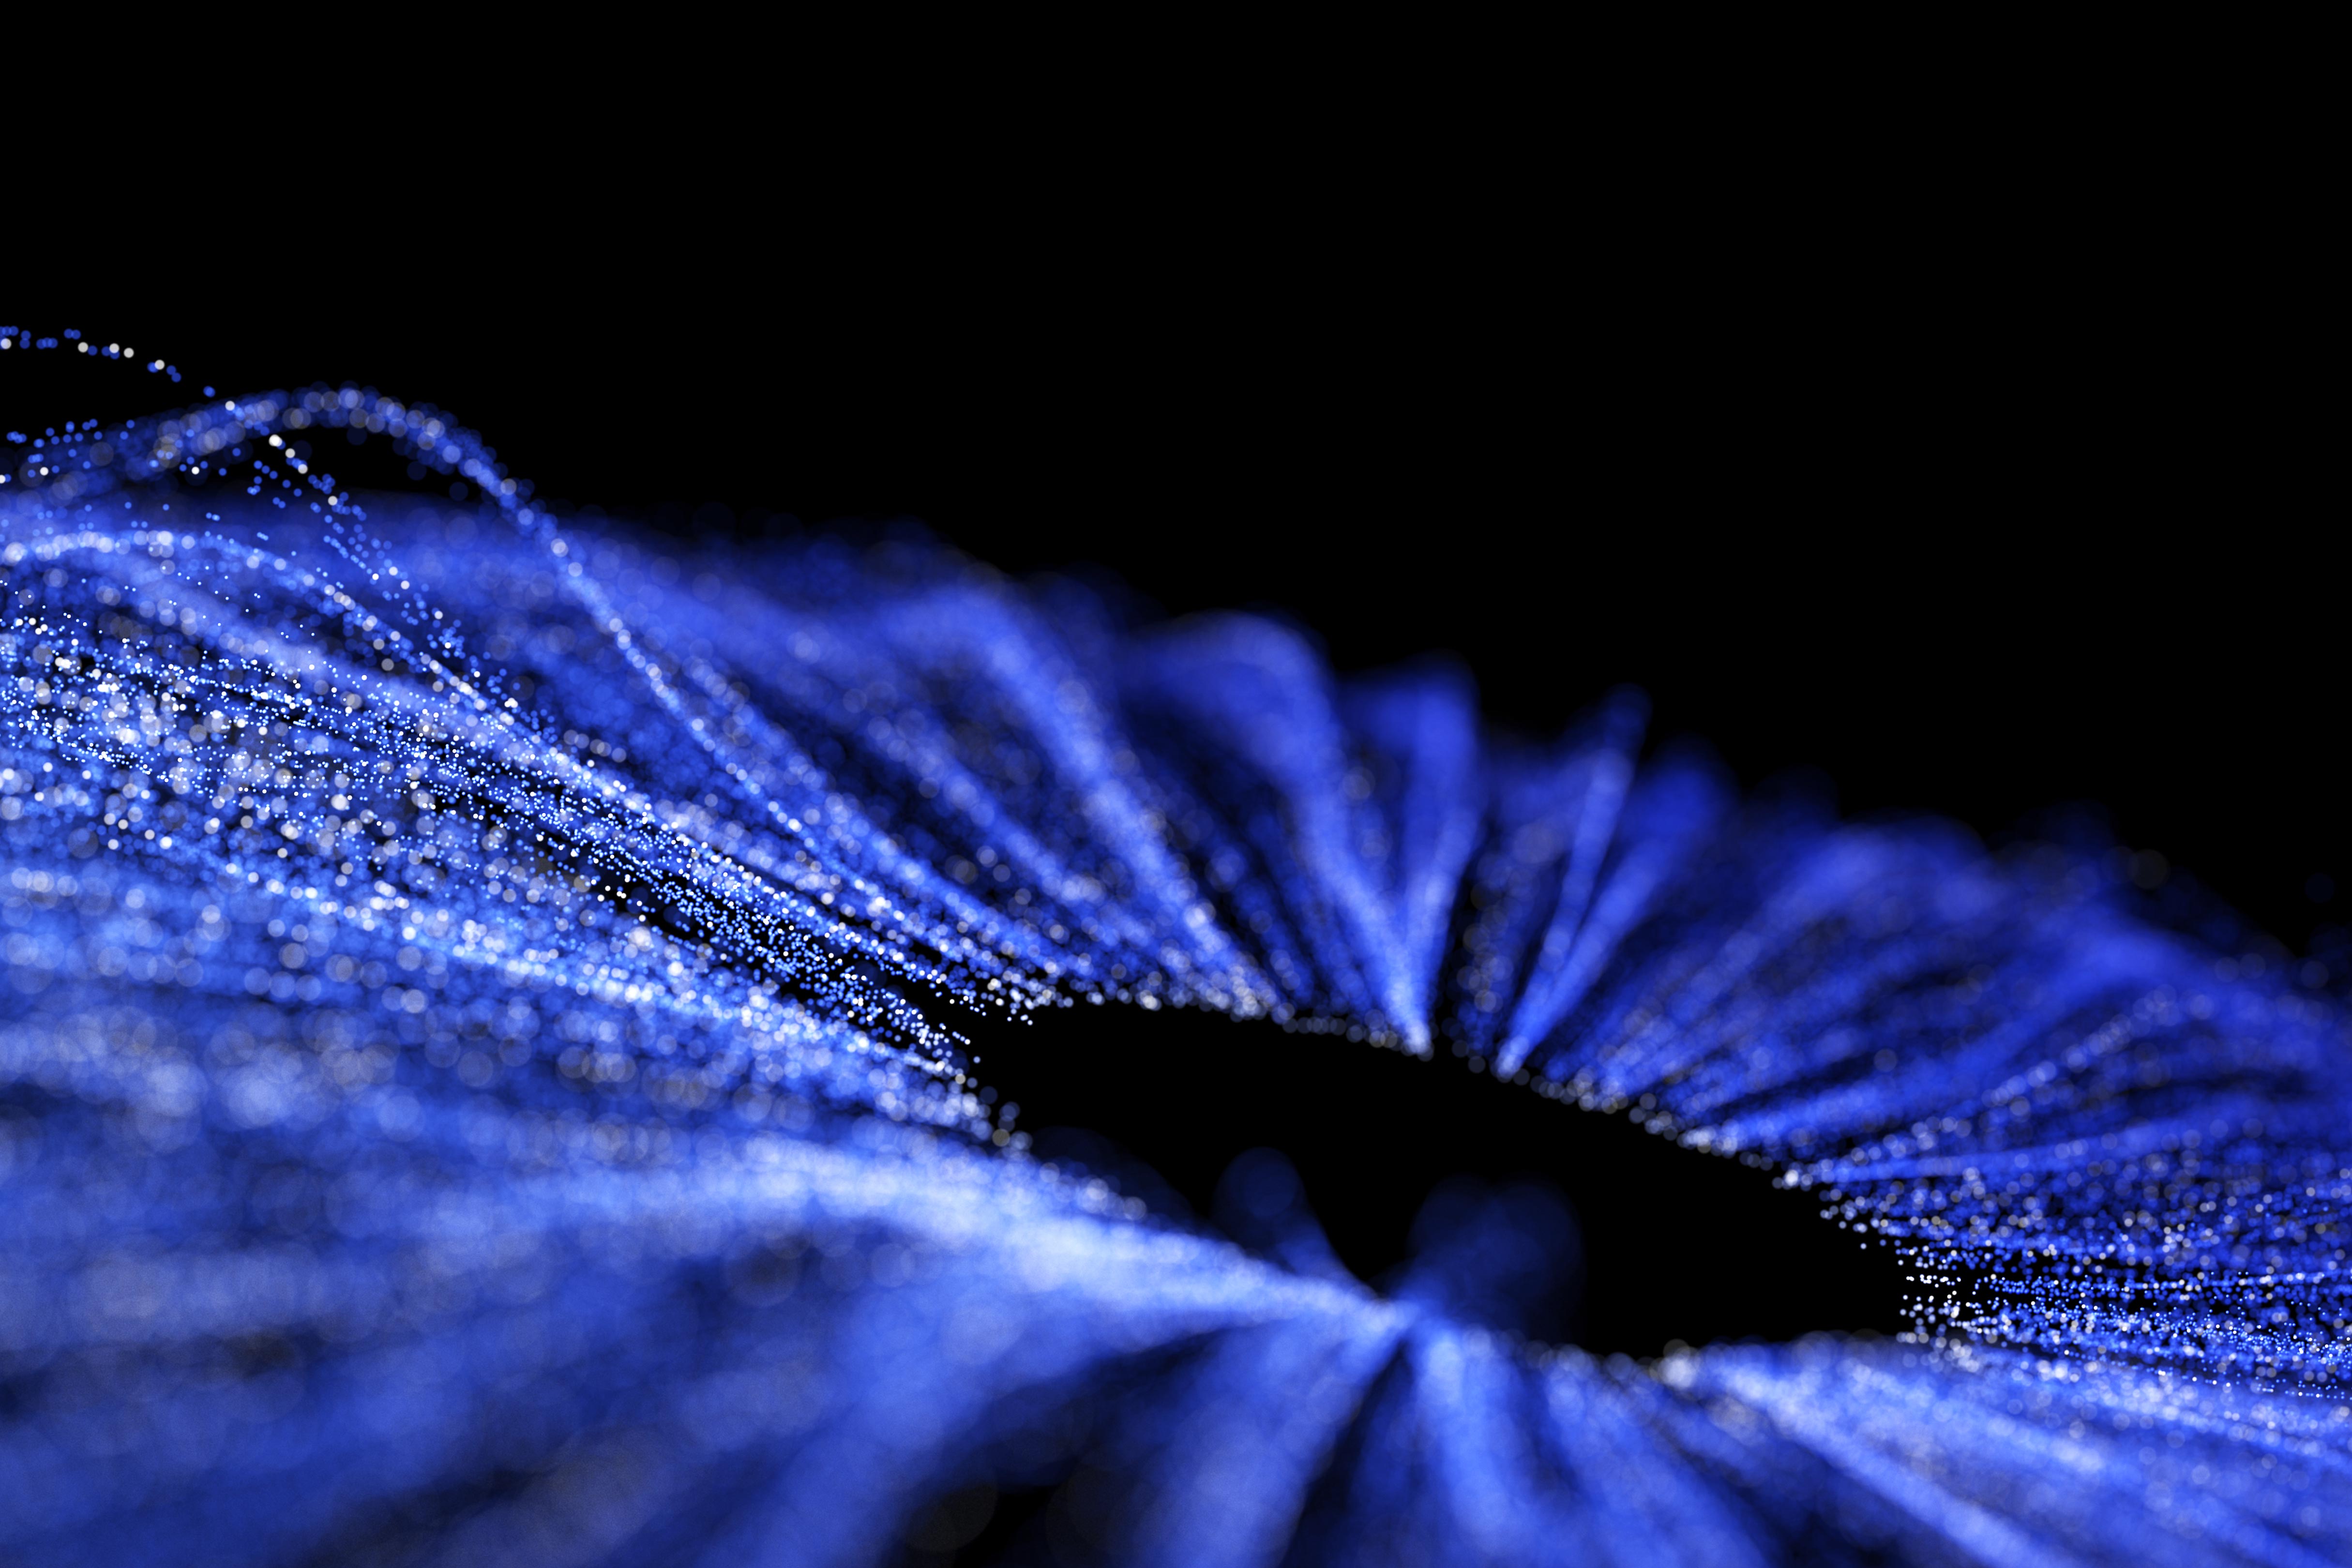 Blue threads of particles on a black background come together to form a circle of negative space, representing connectivity.